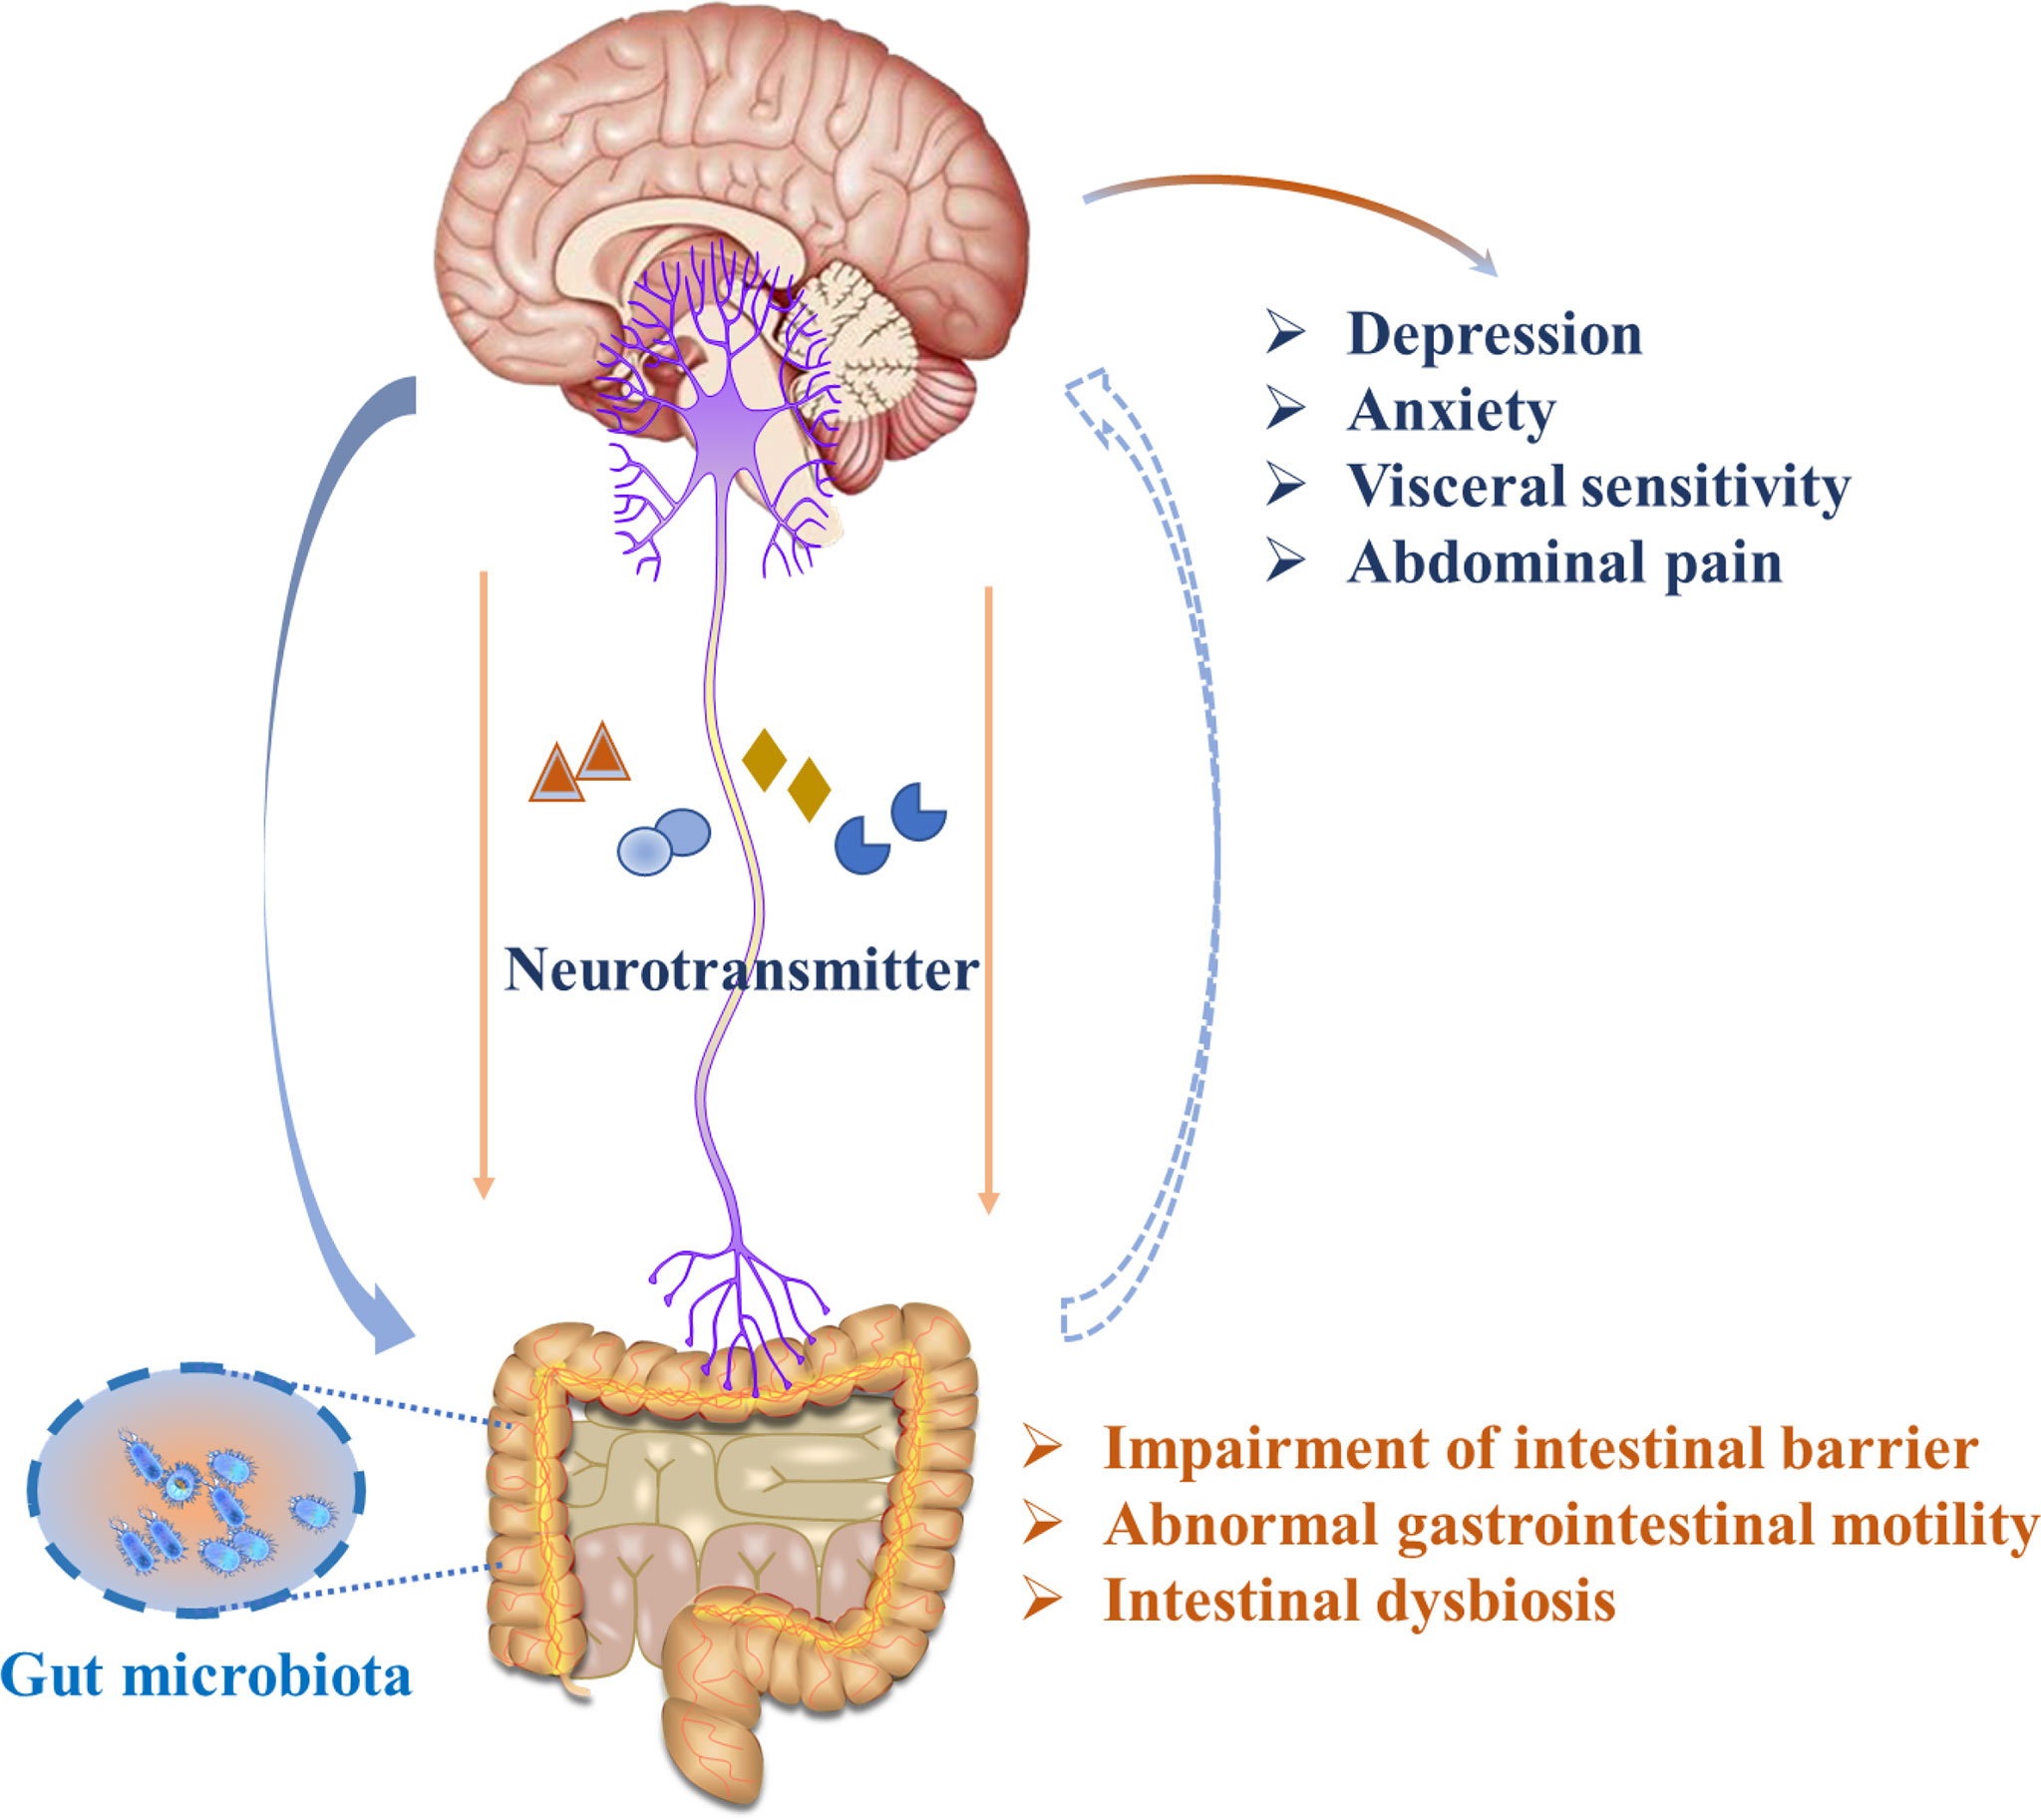 Frontiers | Neurotransmitter and Intestinal Interactions: Focus on the Microbiota-Gut-Brain Axis in Irritable Bowel Syndrome